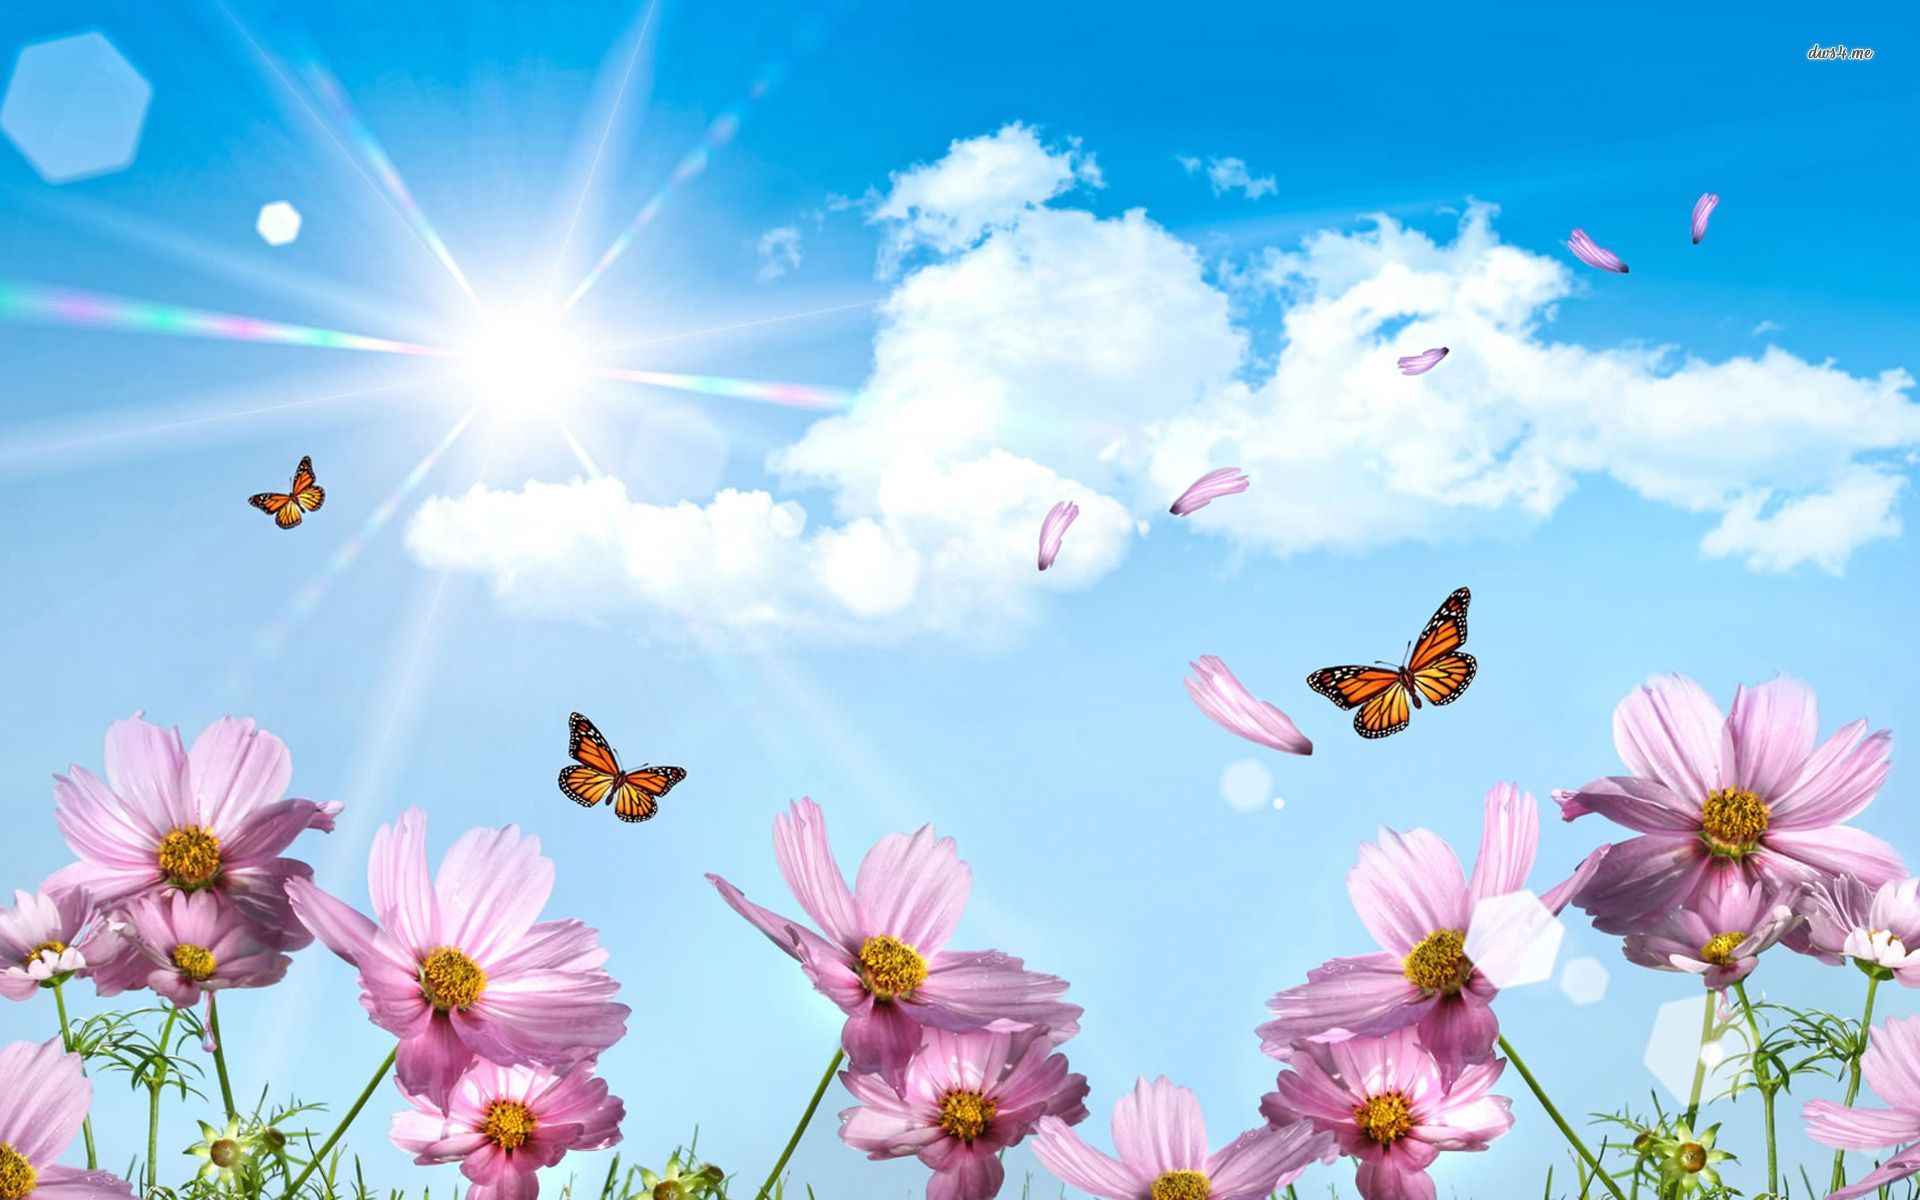 Seasons Spring Picture HD Spring Wallpaper. Spring wallpaper, Summer wallpaper, Butterfly wallpaper